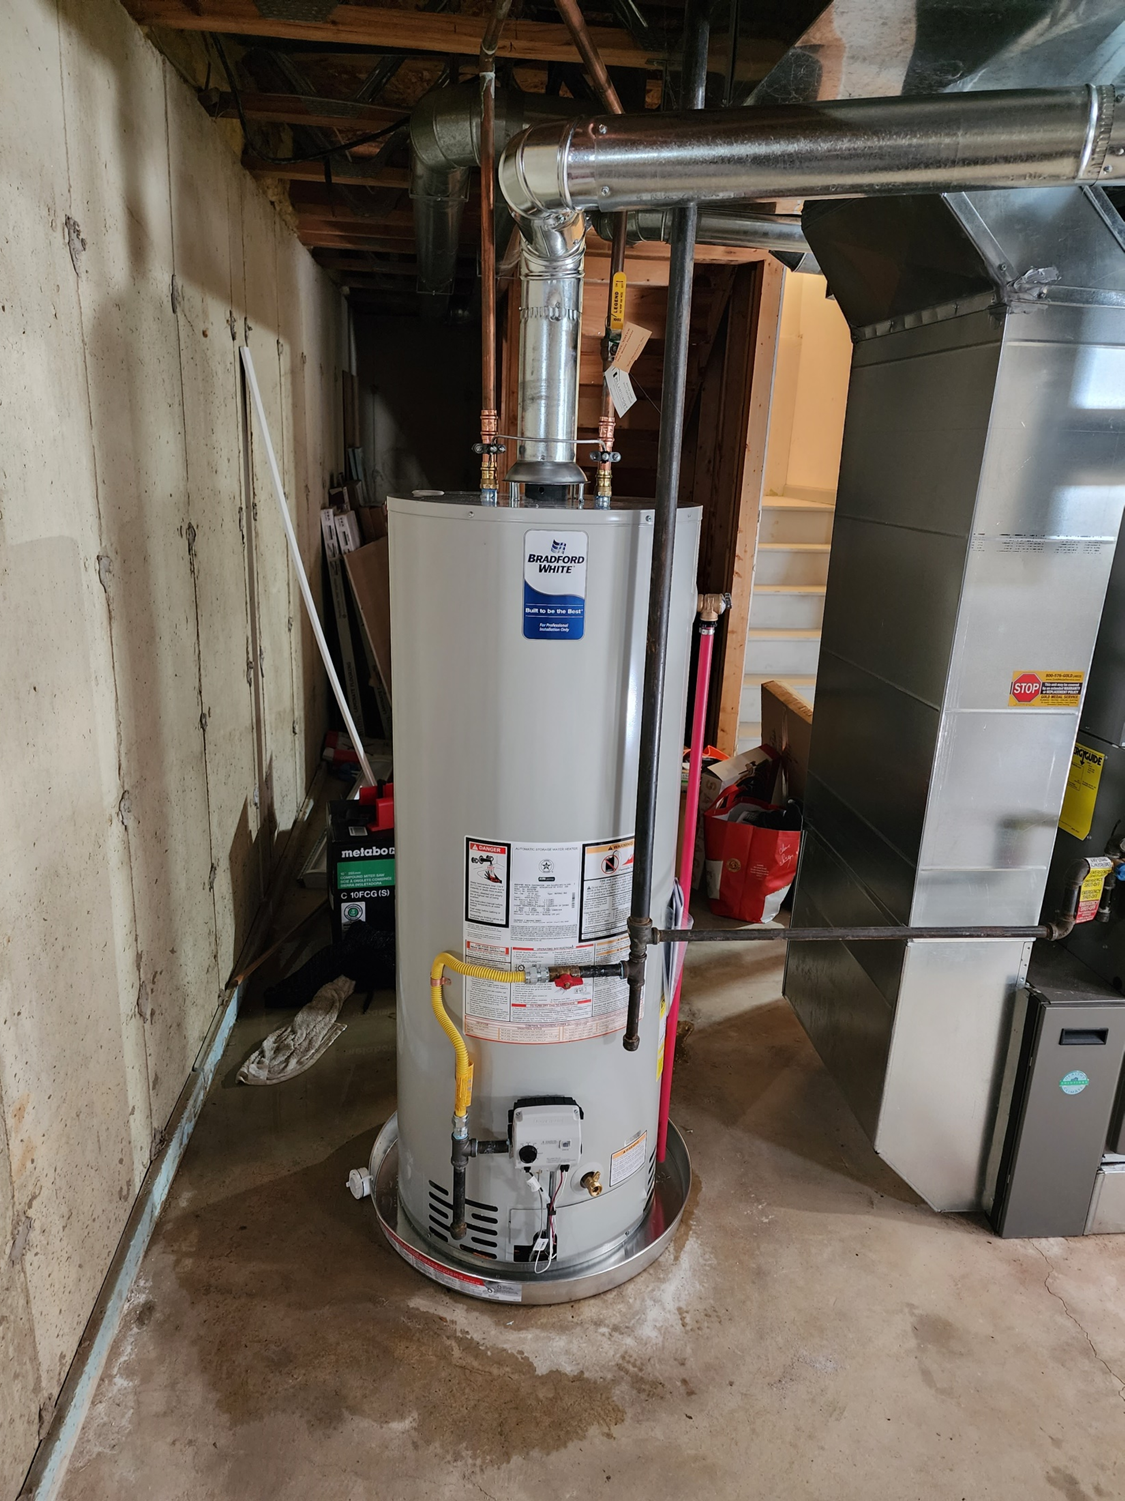 Efficient water heater replacement service by Applause Plumbing featuring a 50-gallon Bradford White unit with gas flex and chimney flue addition for optimal performance and safety. Expert plumbing solutions in action. The project was completed for a customer in Stewartsville, NJ.